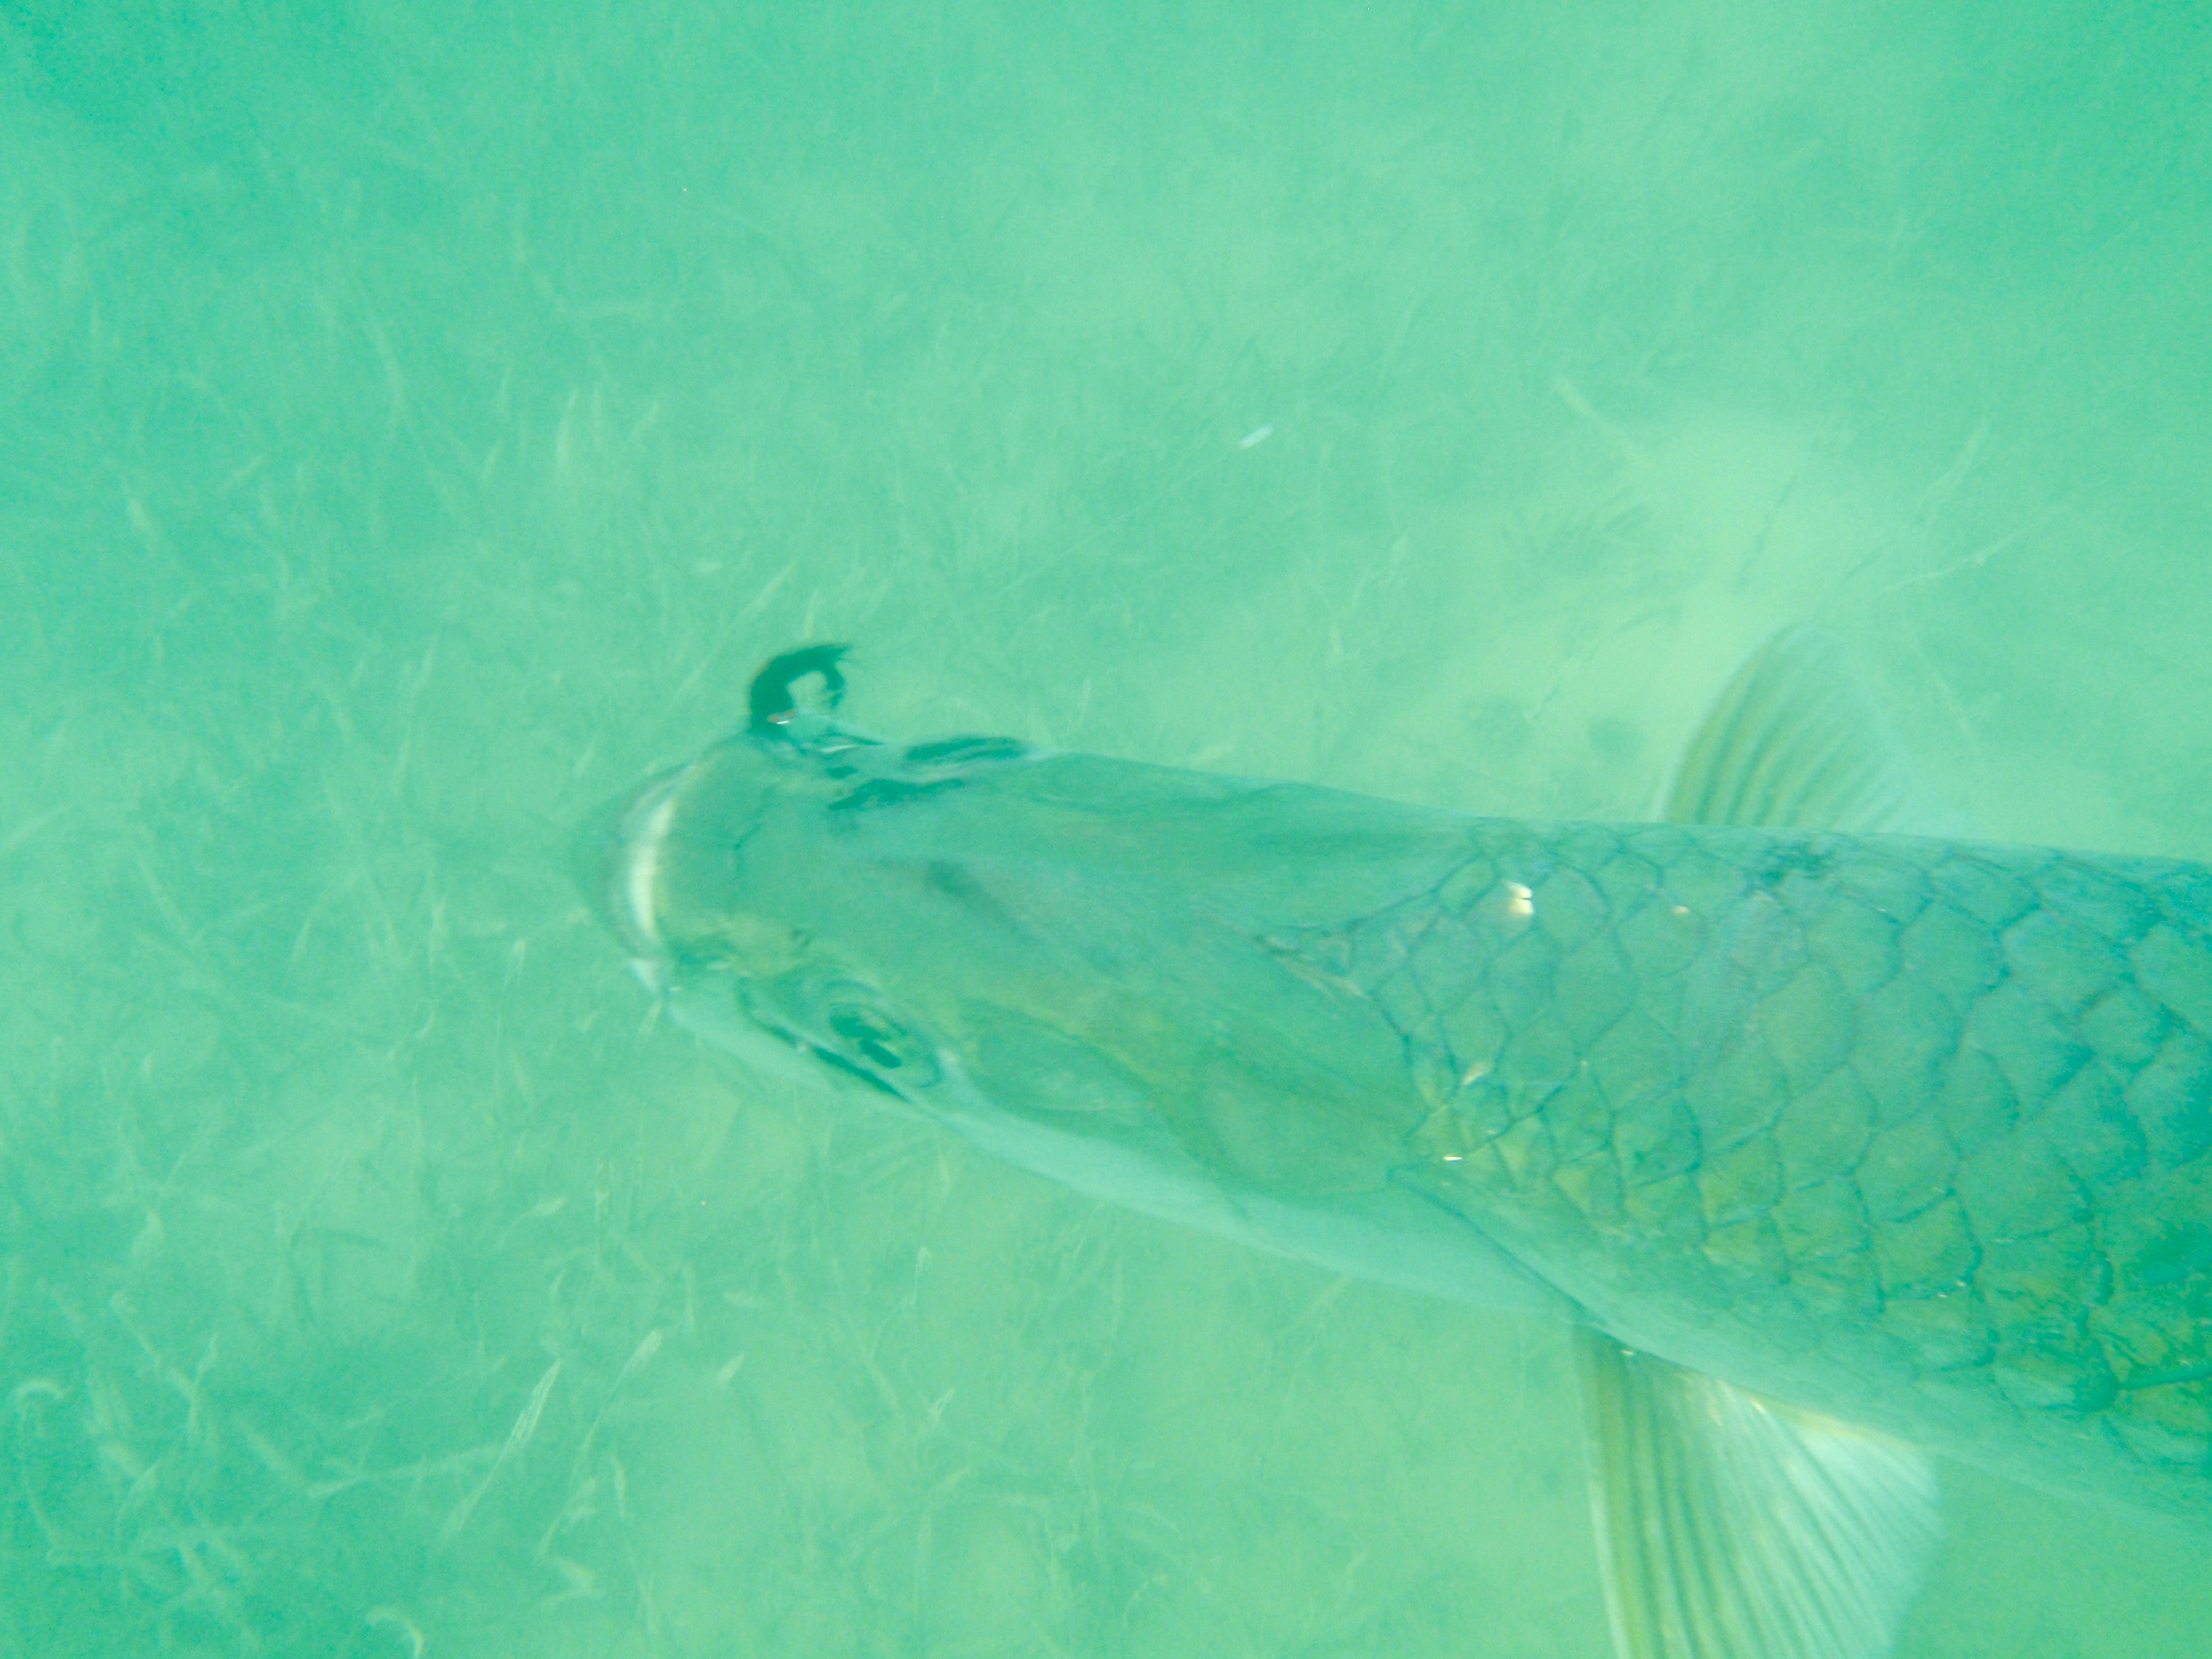 Tarpon underwater with a lure in its mouth